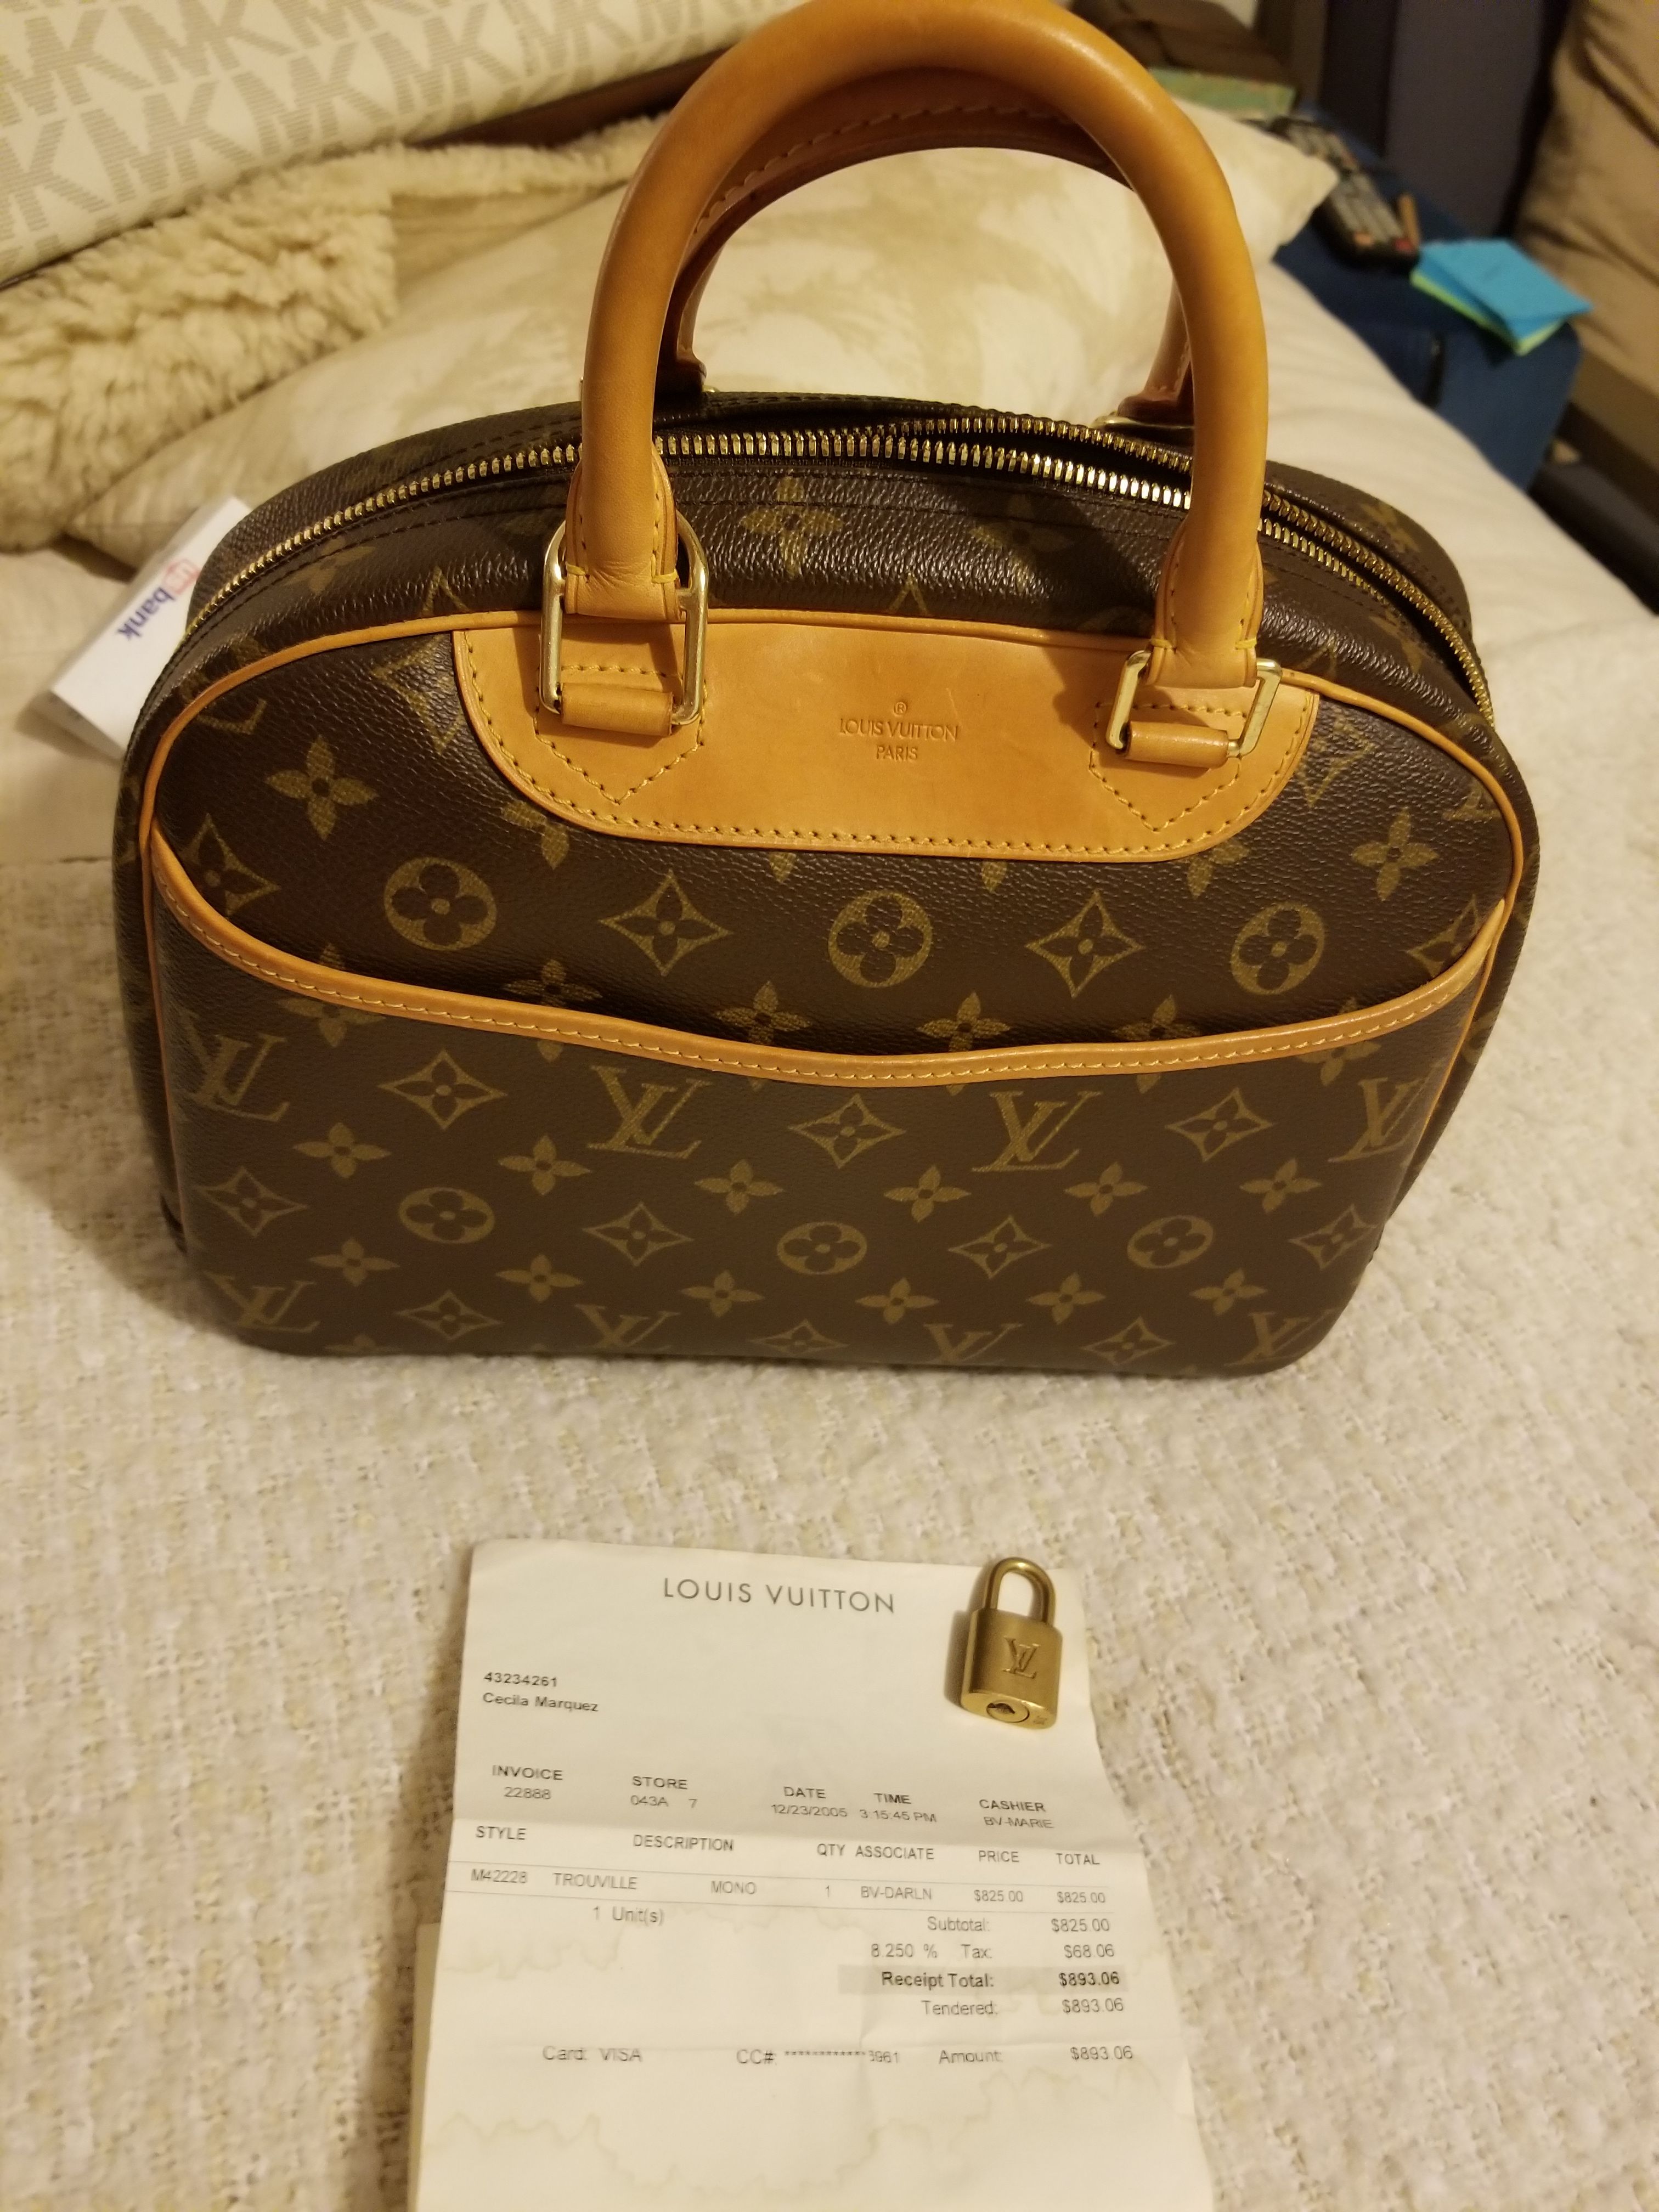 Louis Vuitton Traveling with style original poster for Sale in Santa  Monica, CA - OfferUp